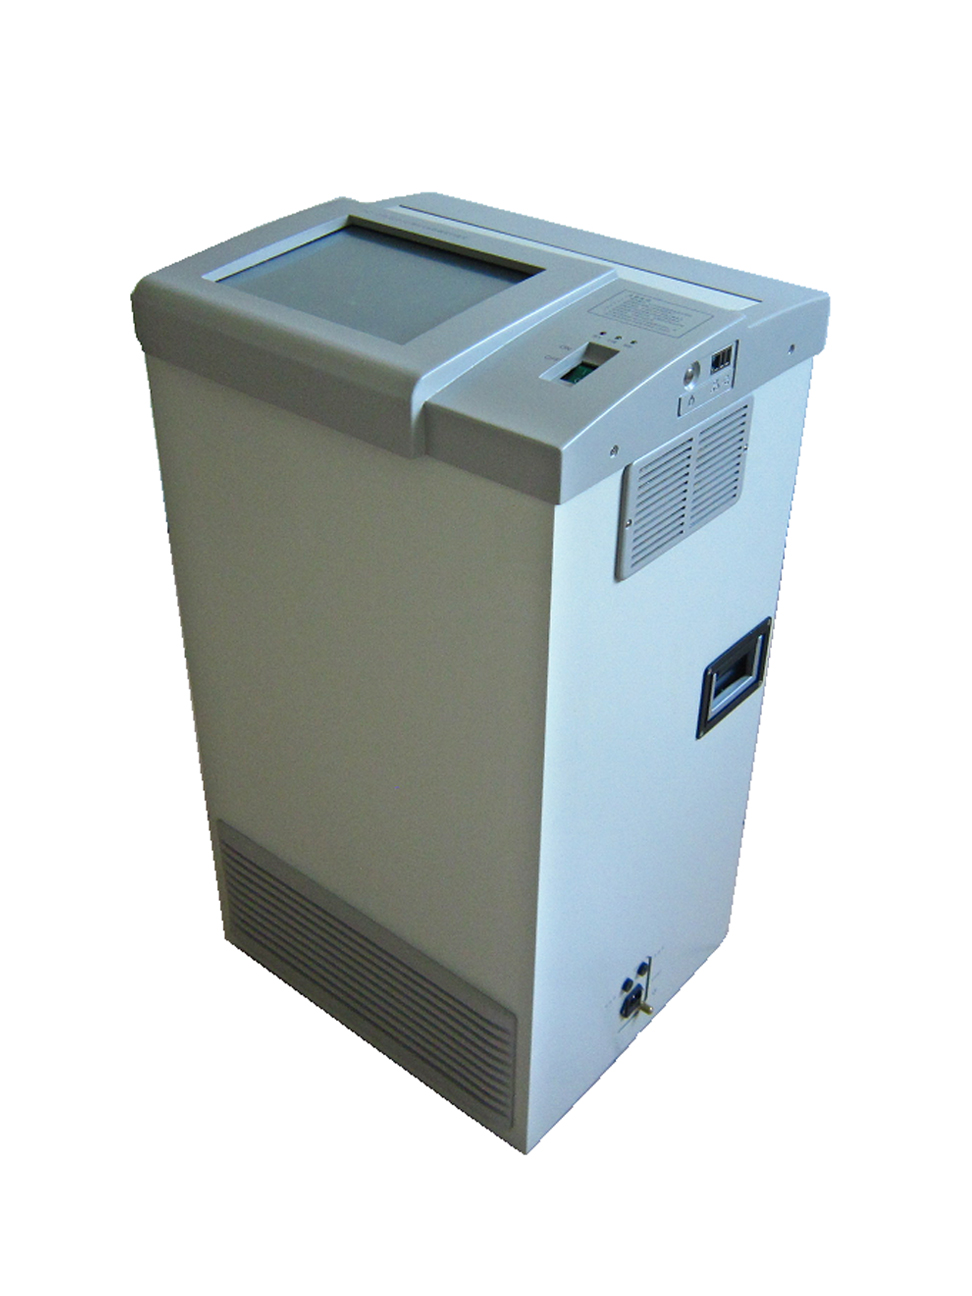 CN-2005B Computed X-ray Radiography Scanner